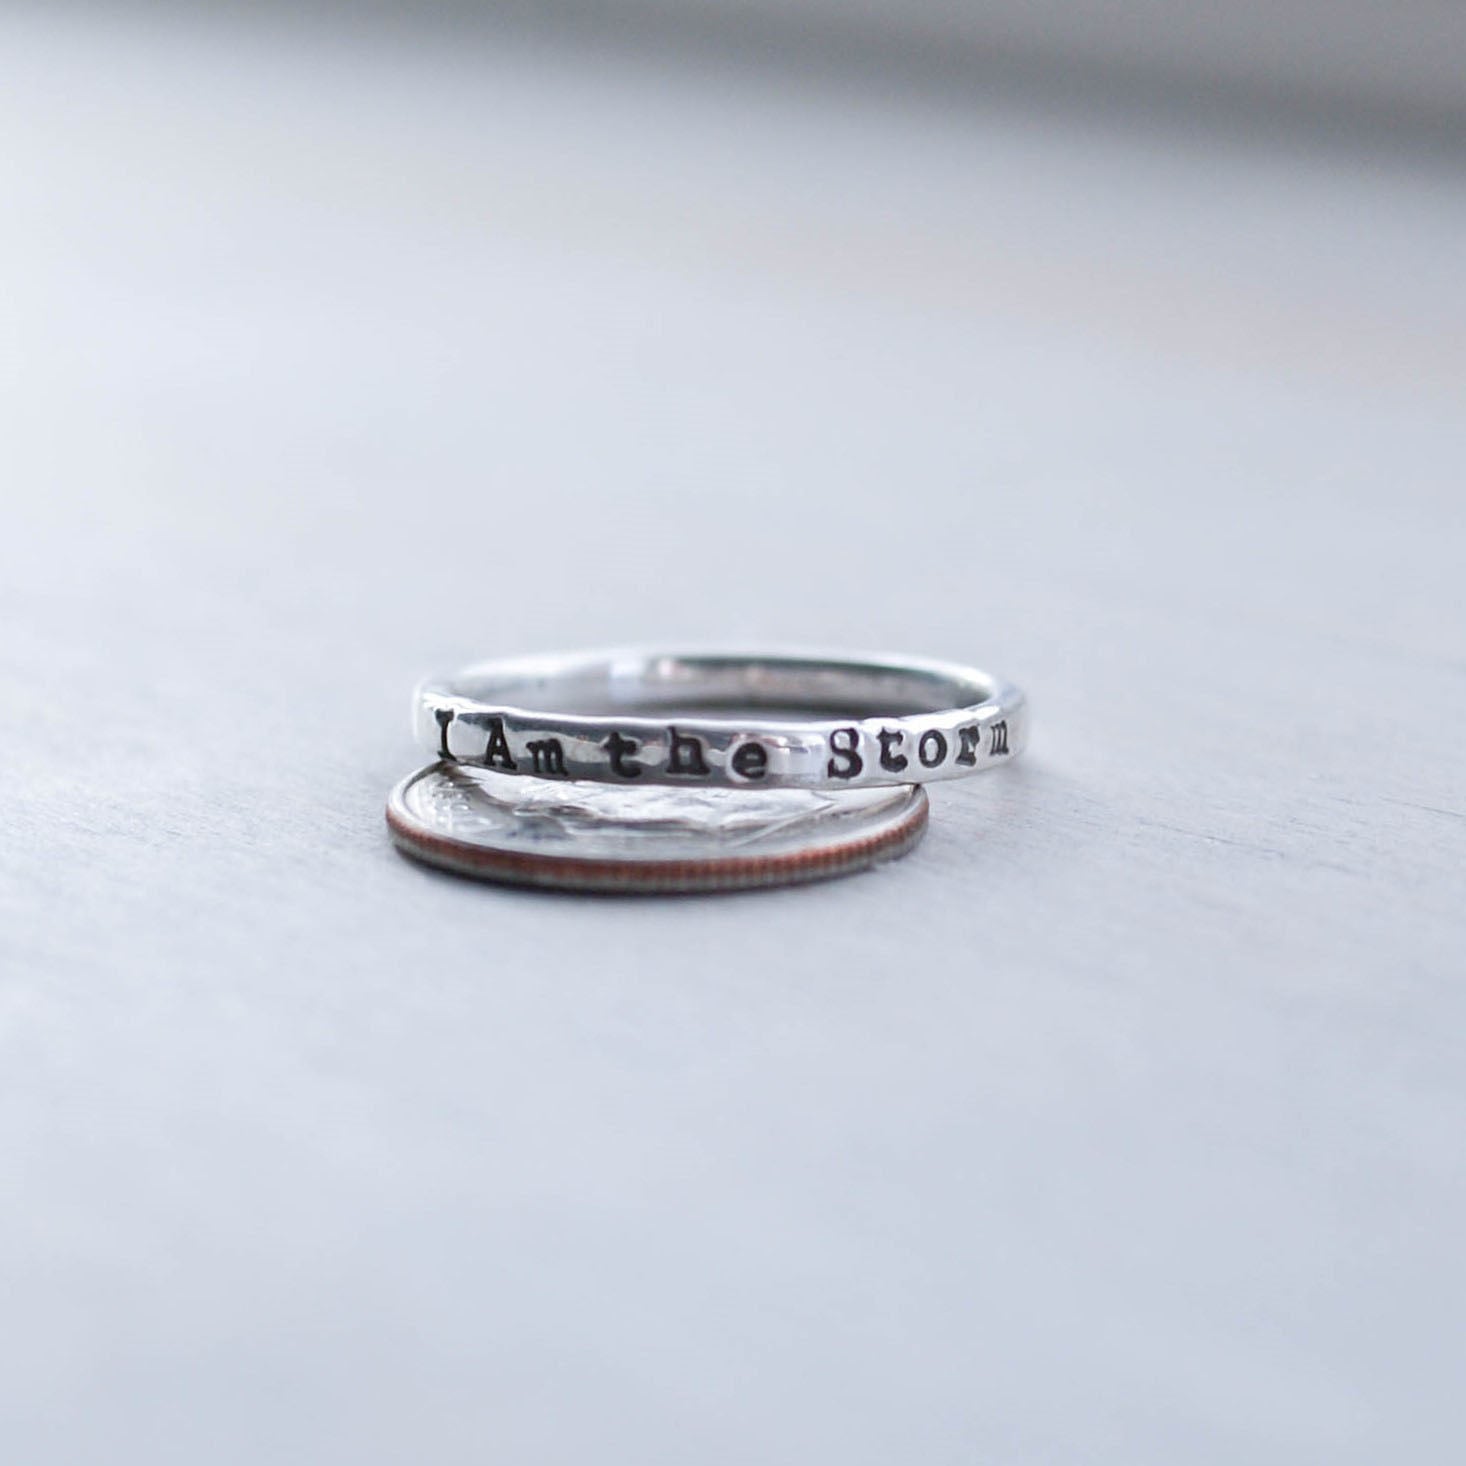 Image of I am the storm motivaltional ring in 925 sterling silver